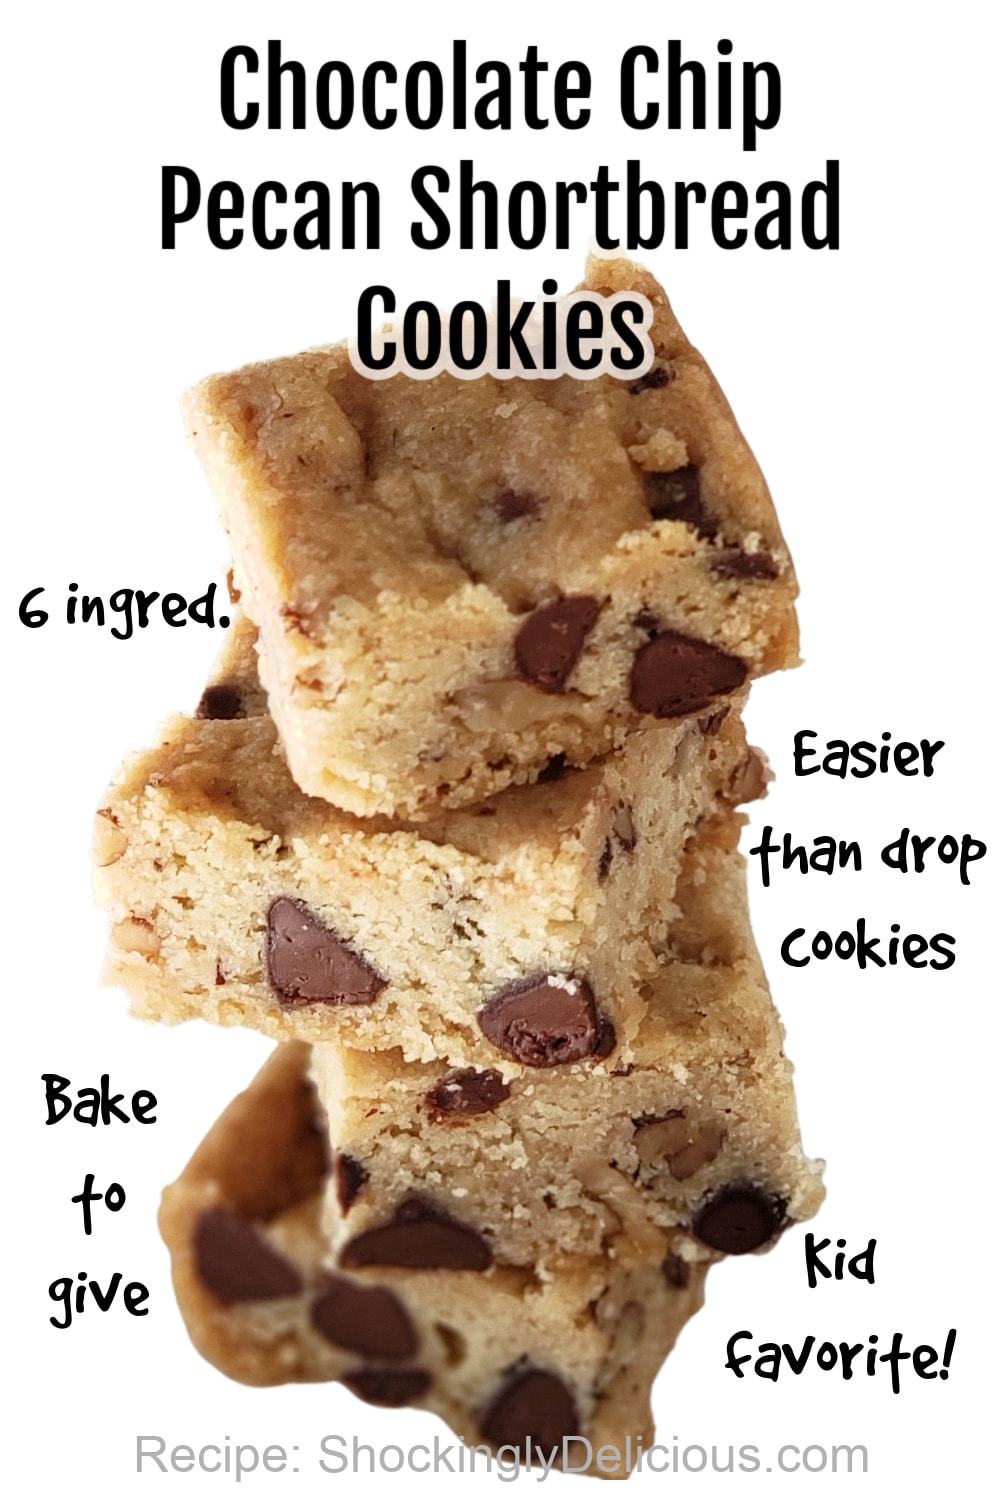 Stack of 4 Chocolate Chip Pecan Shortbread Cookies with words superimposed on top of the photo